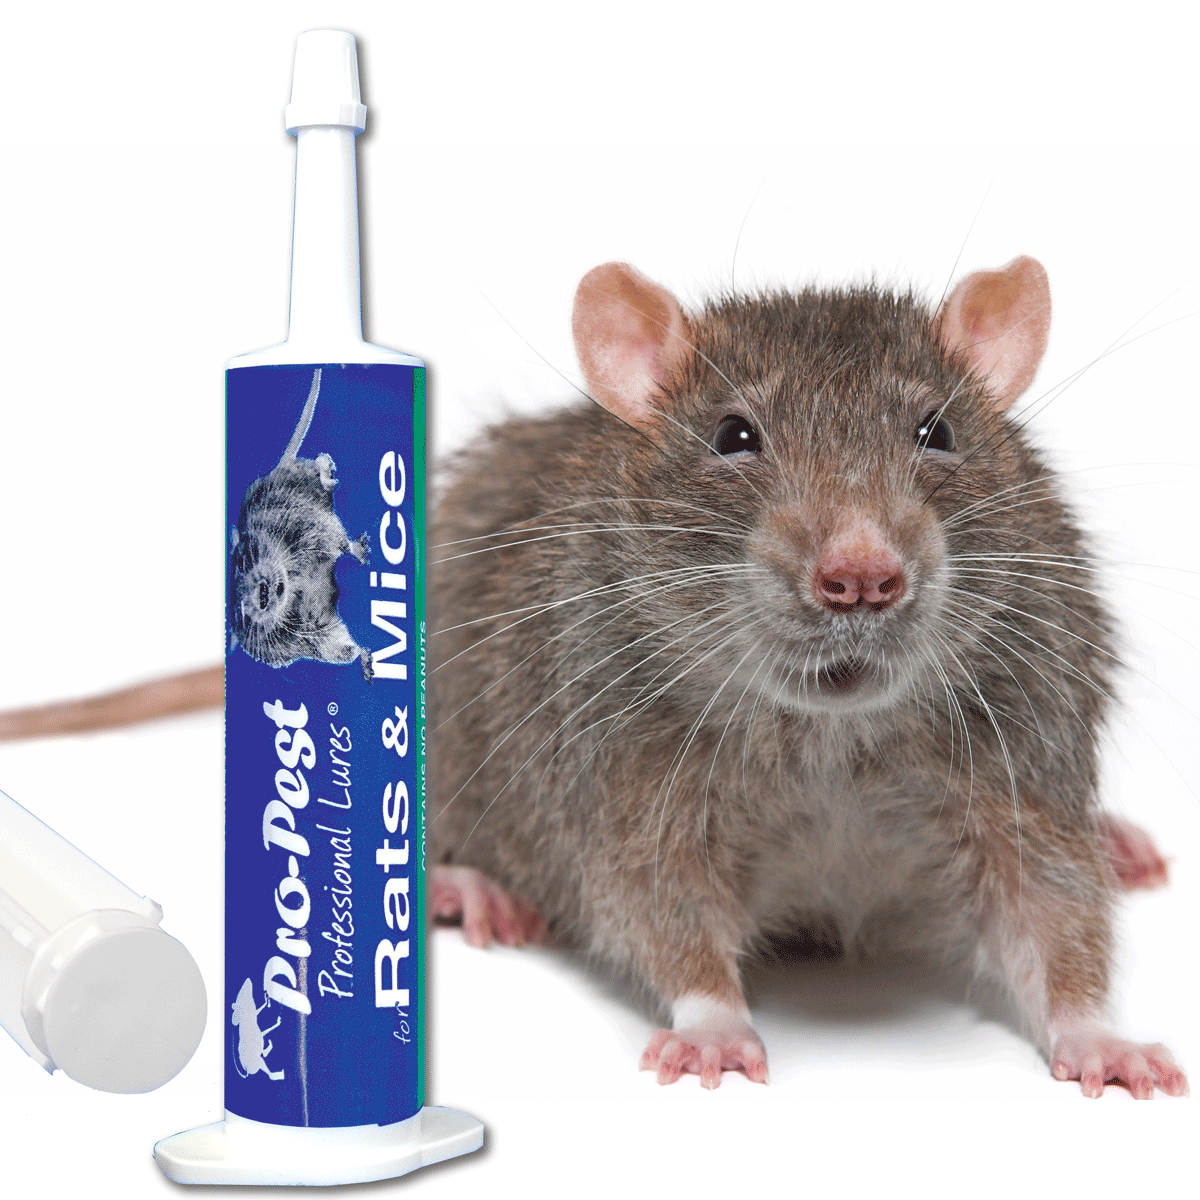 What's The Best Bait For Mouse Traps? - Pinnacle Pest Control